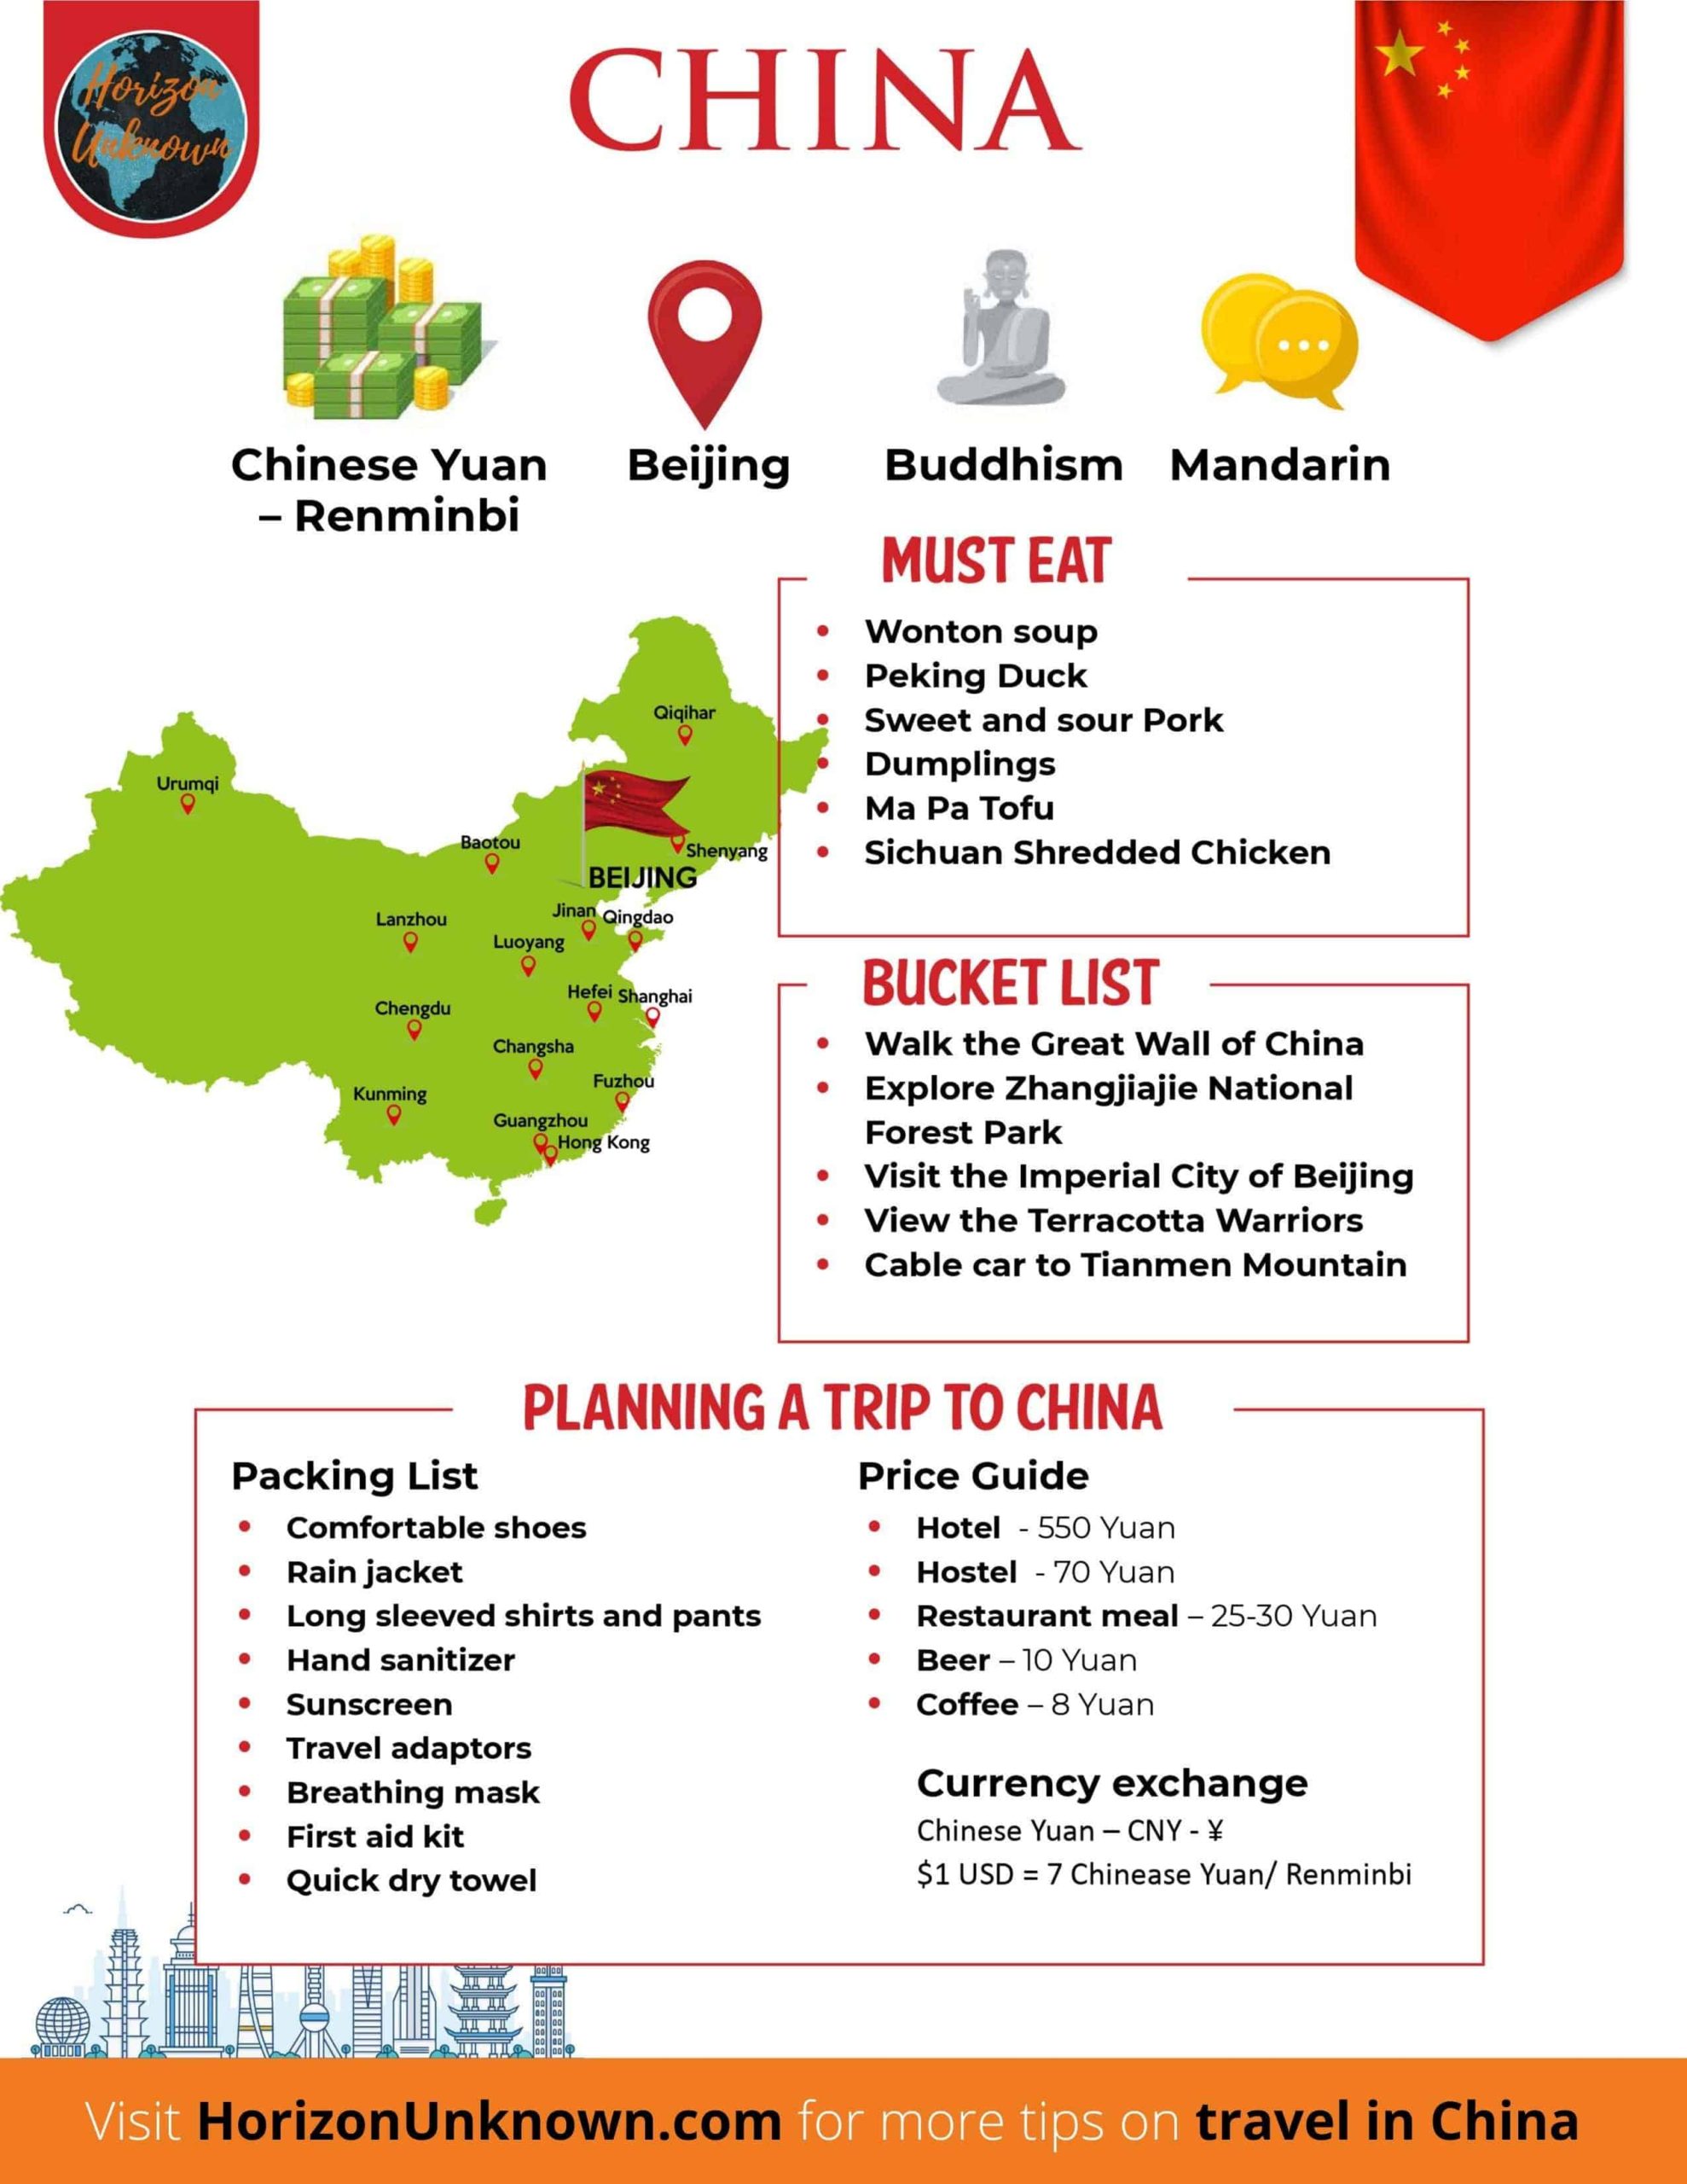 Planning Travel to China Guide Tips For Budget Travel and Bucketlist